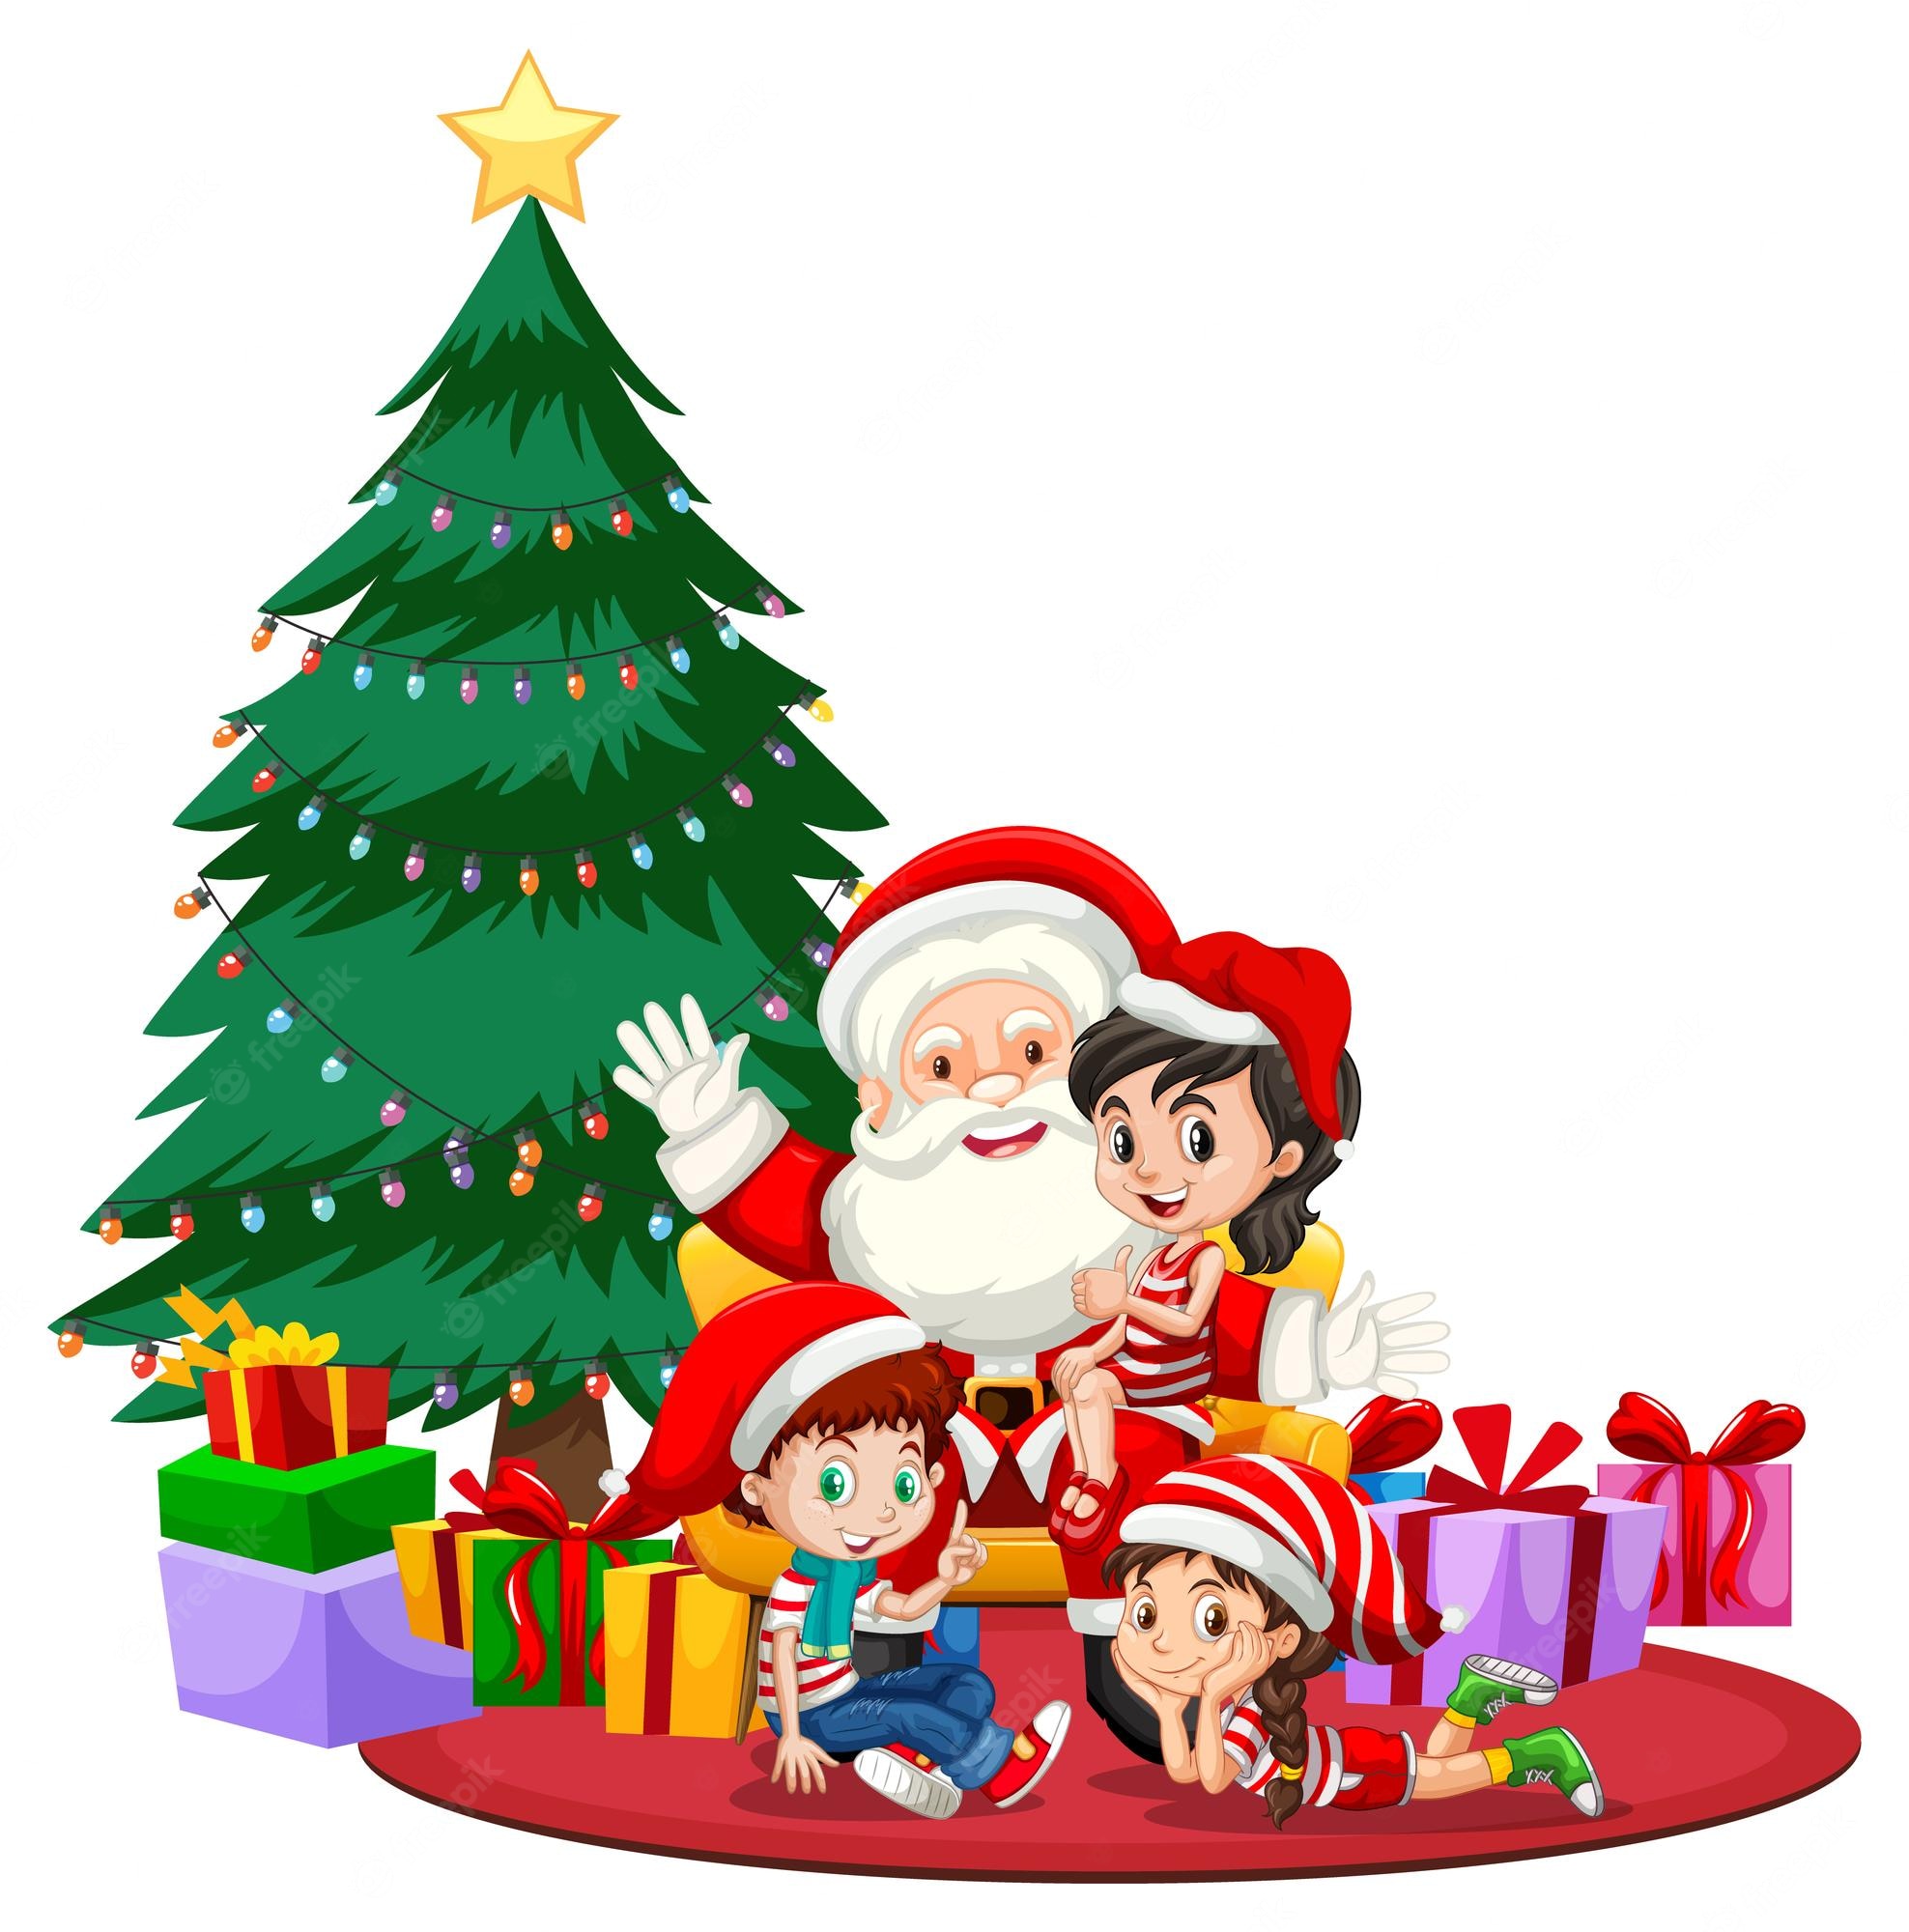 Christmas Clip Art - Christmas Images - Clip Art Library